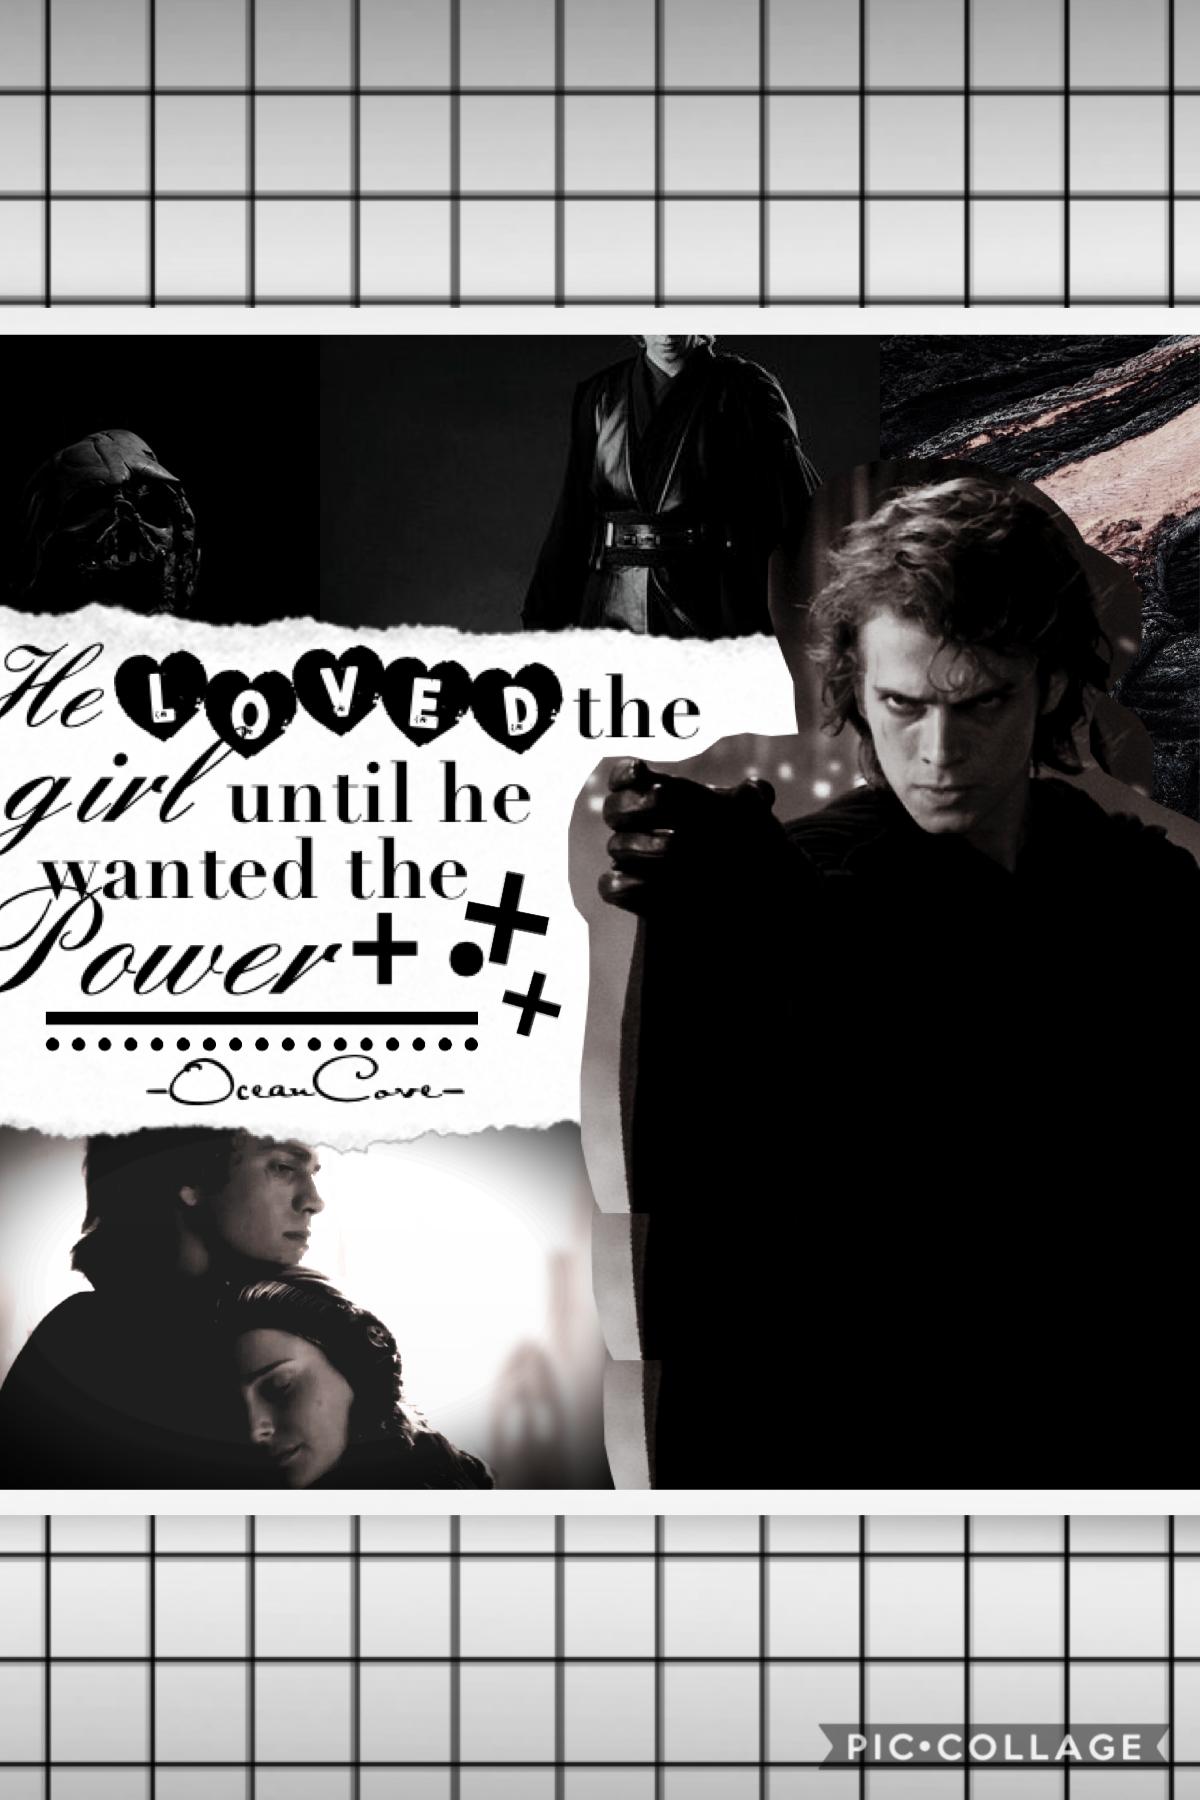 An anidala collage for Valentine’s Day ❤️